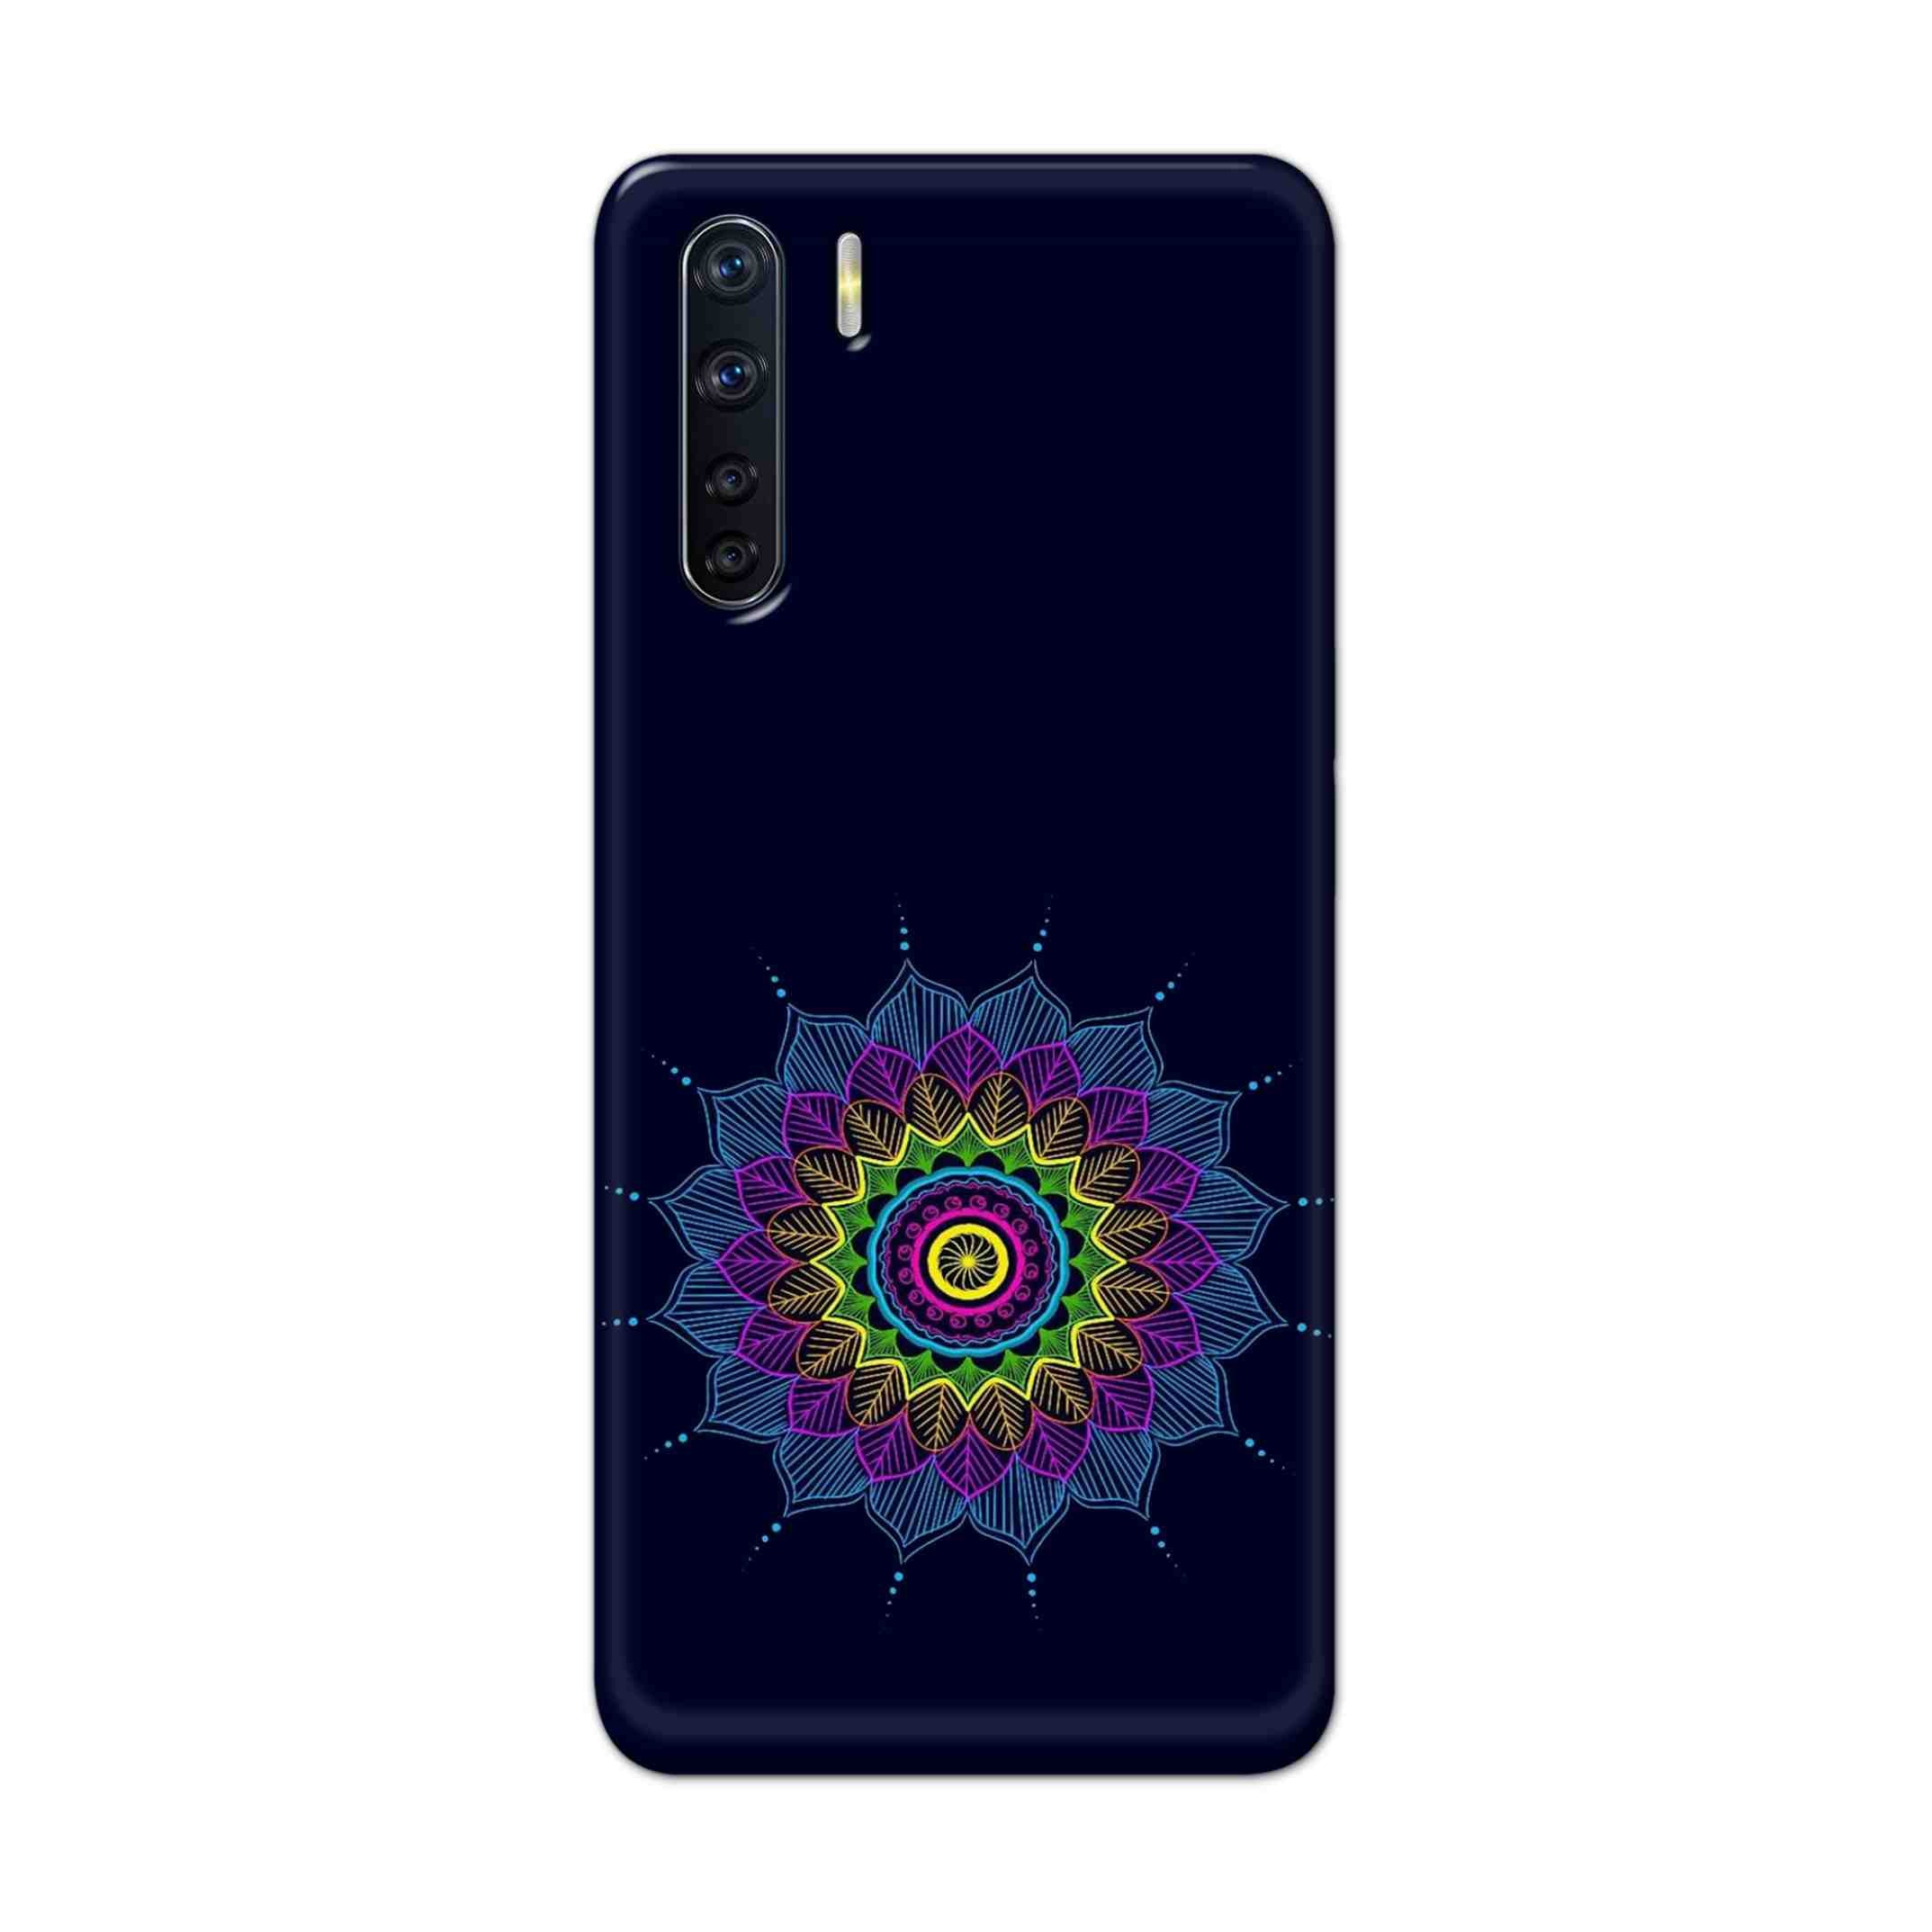 Buy Jung And Mandalas Hard Back Mobile Phone Case Cover For OPPO F15 Online